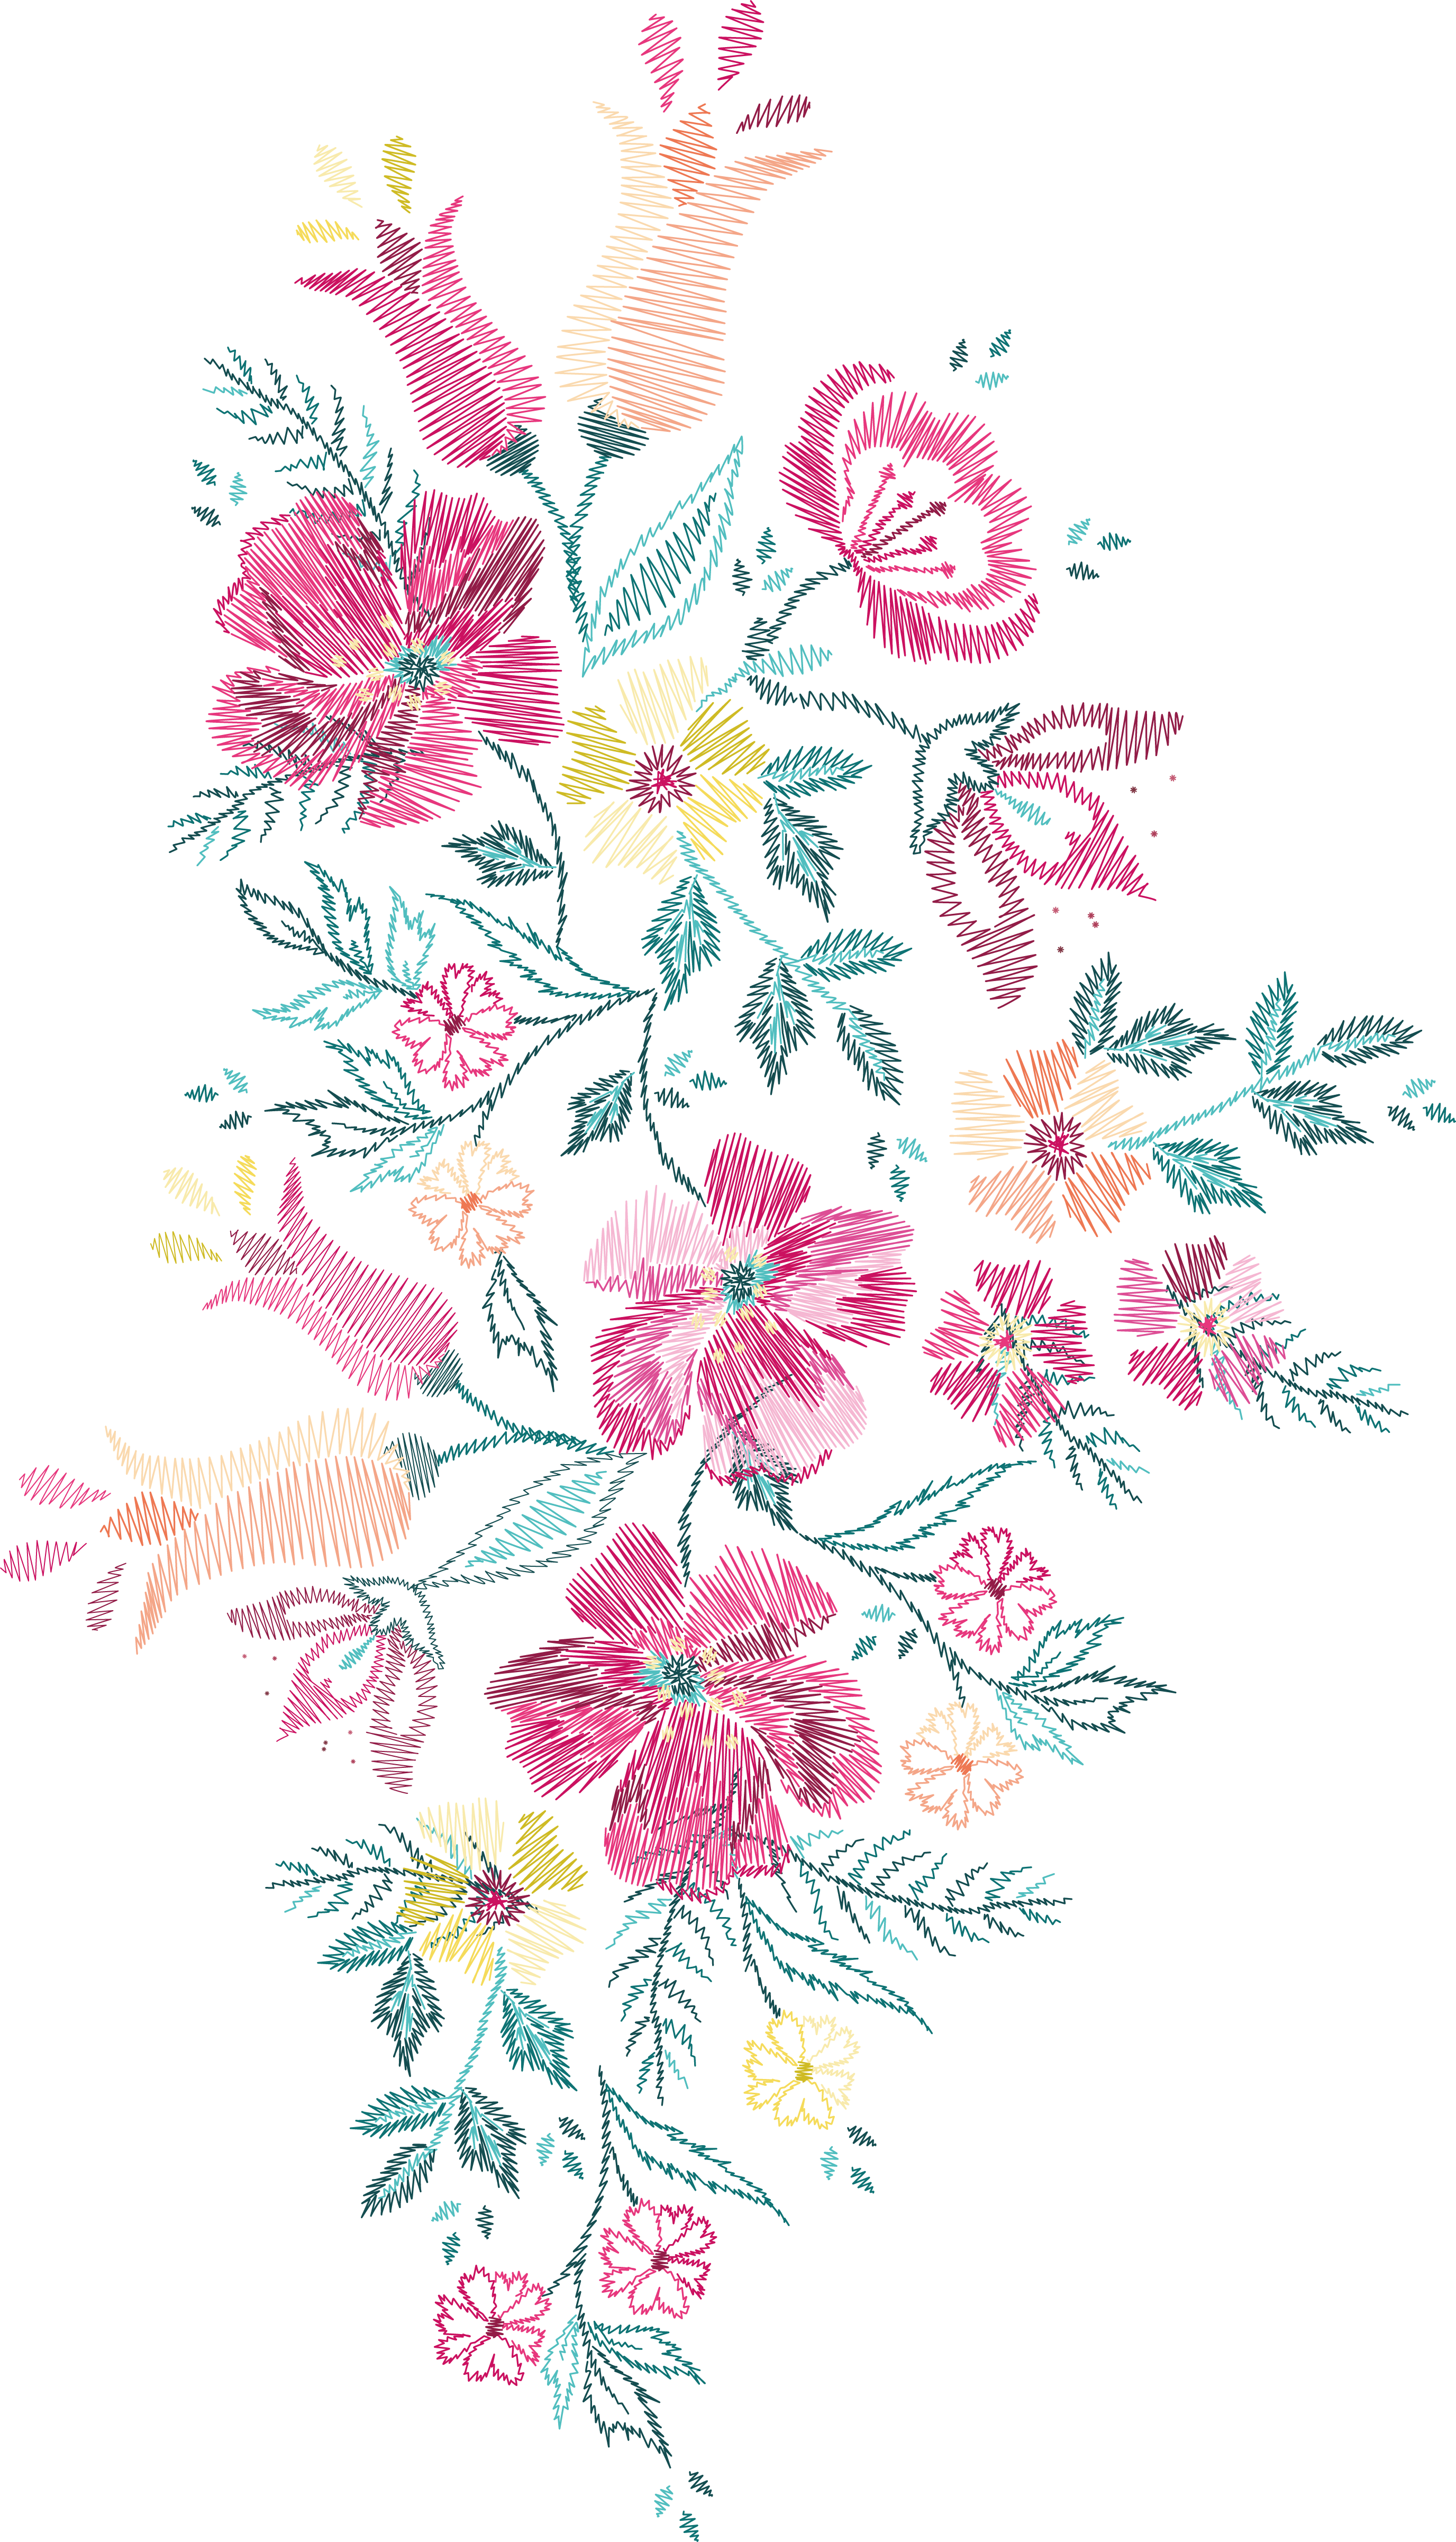 Download Pink Flower Cross Embroidery Stitch Free Download Image Hq Png Image Freepngimg